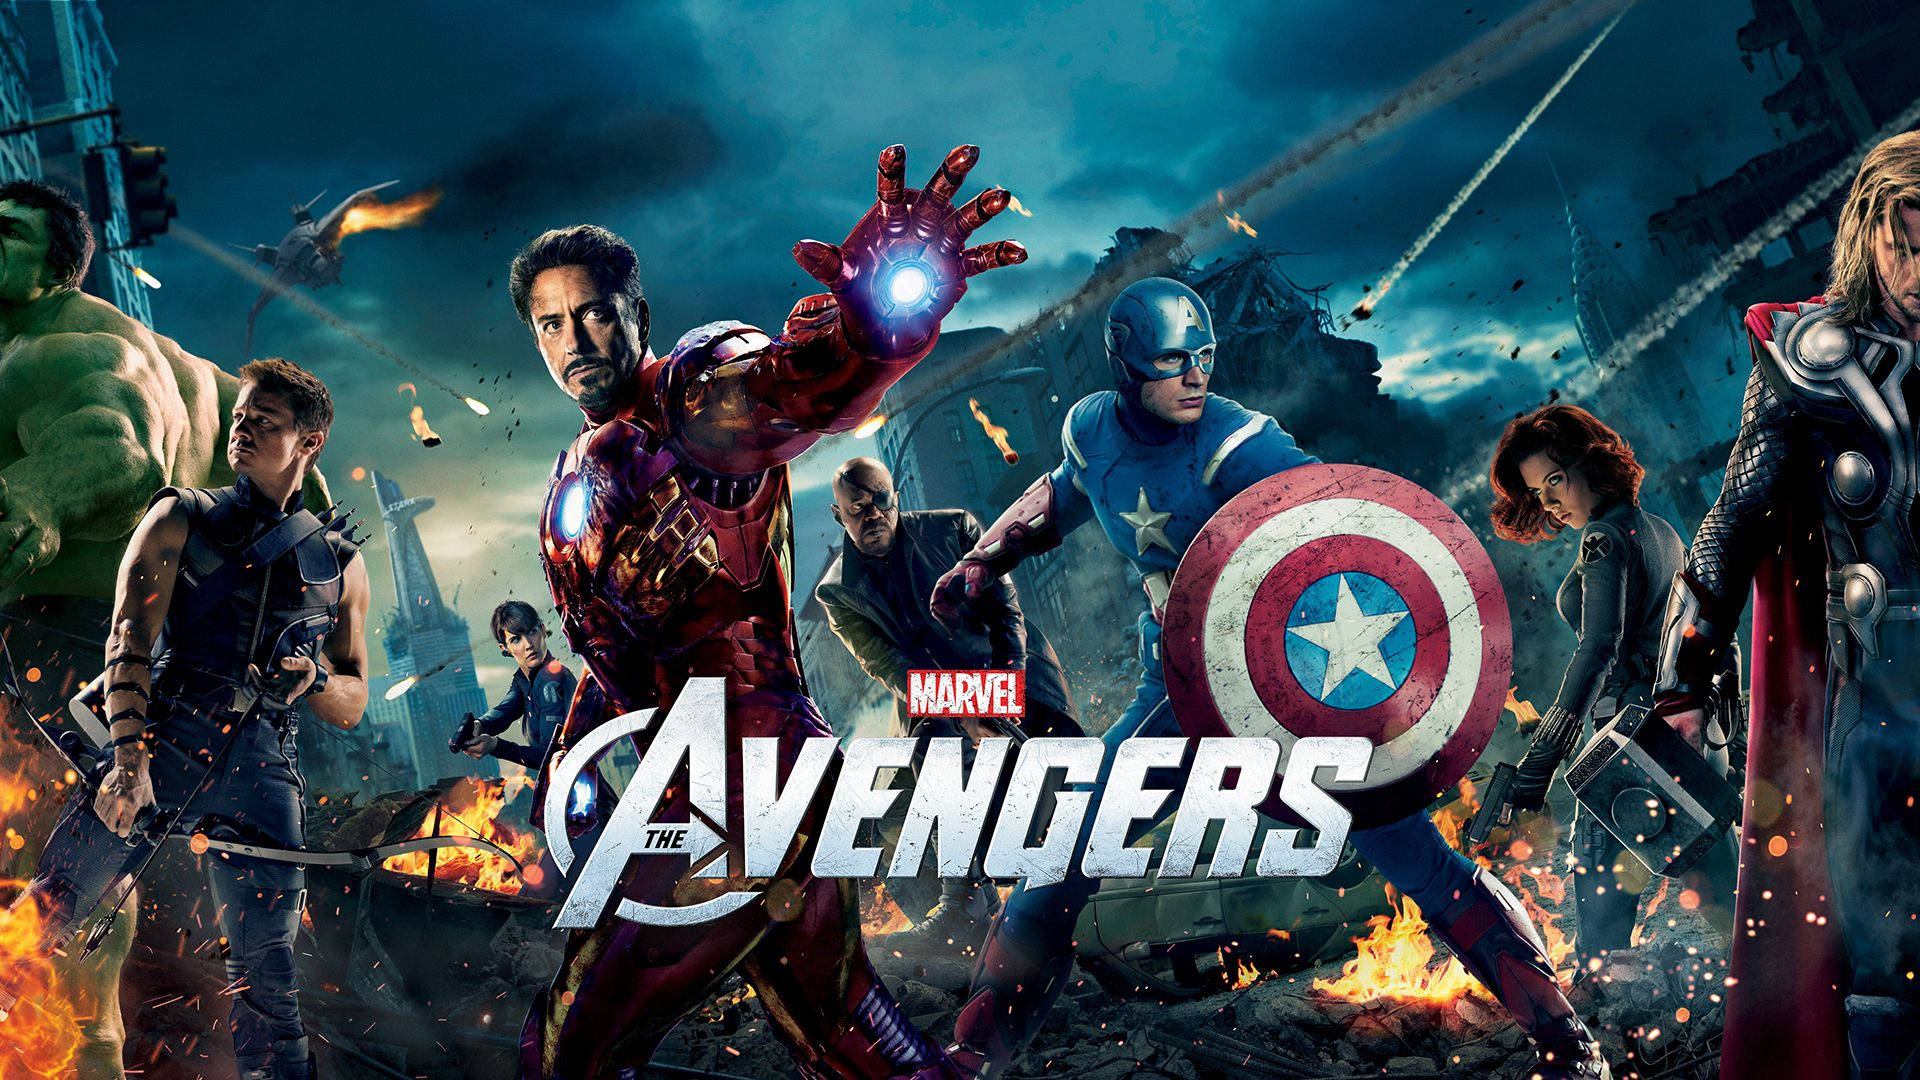 Download Avengers wallpapers for mobile phone free Avengers HD pictures